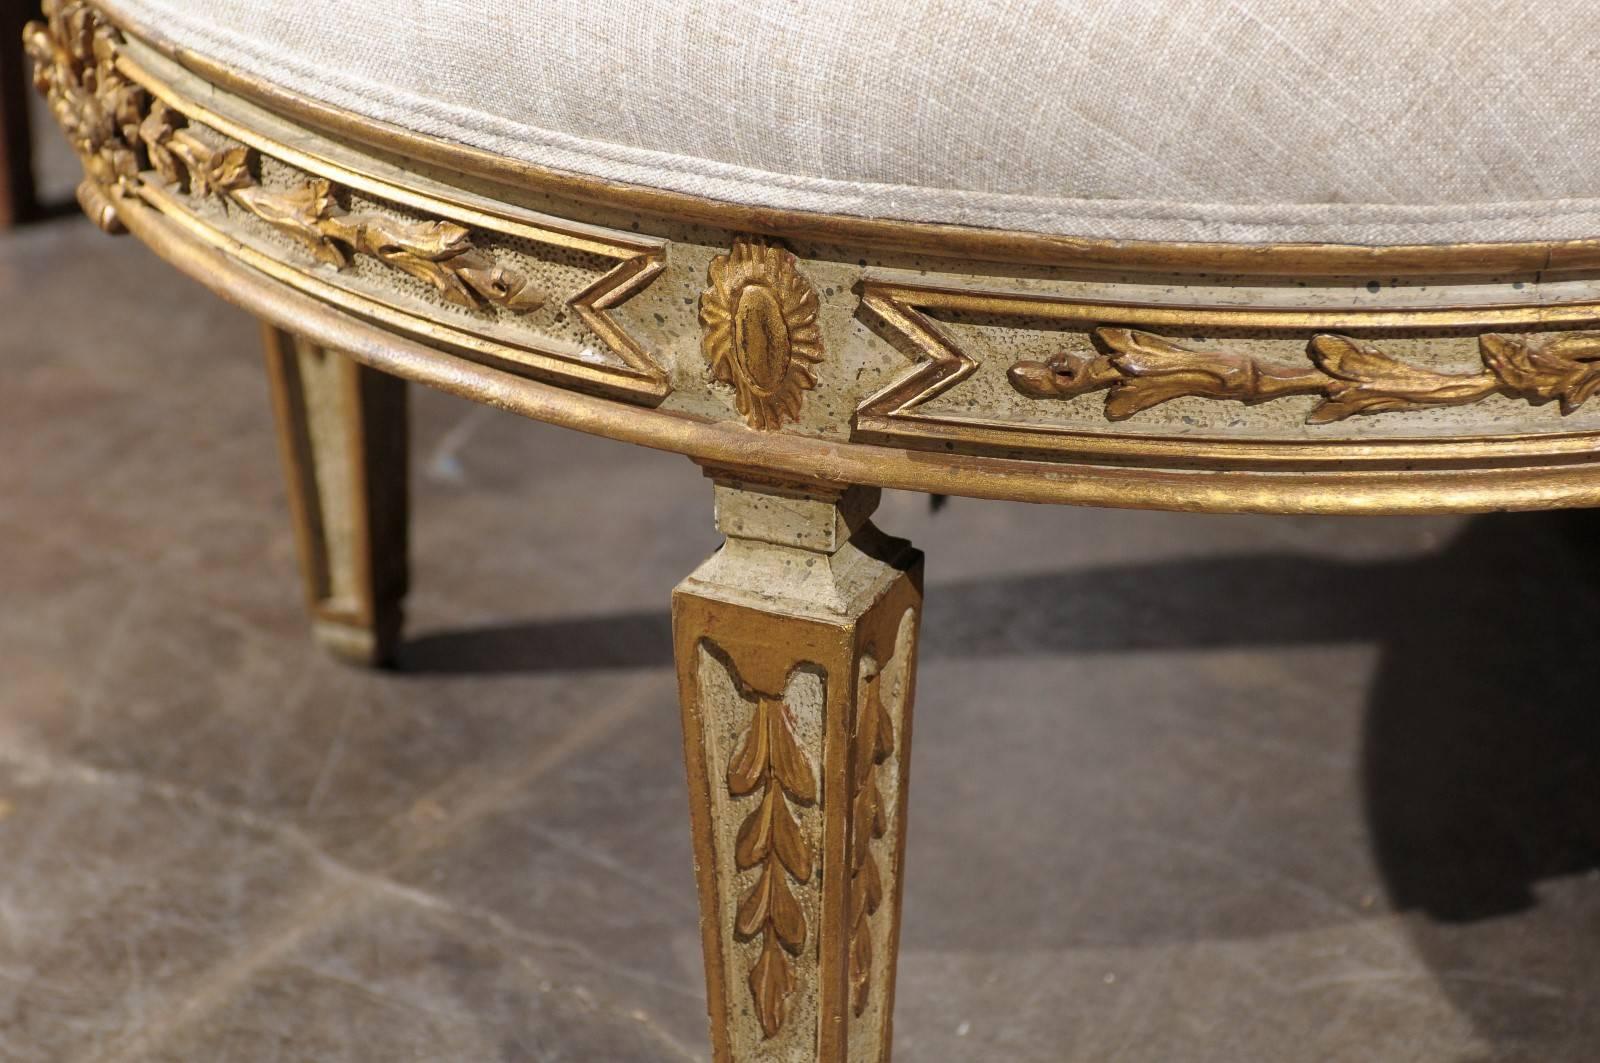 Italian Neoclassical Style Upholstered Round Ottoman with Giltwood Motifs 3